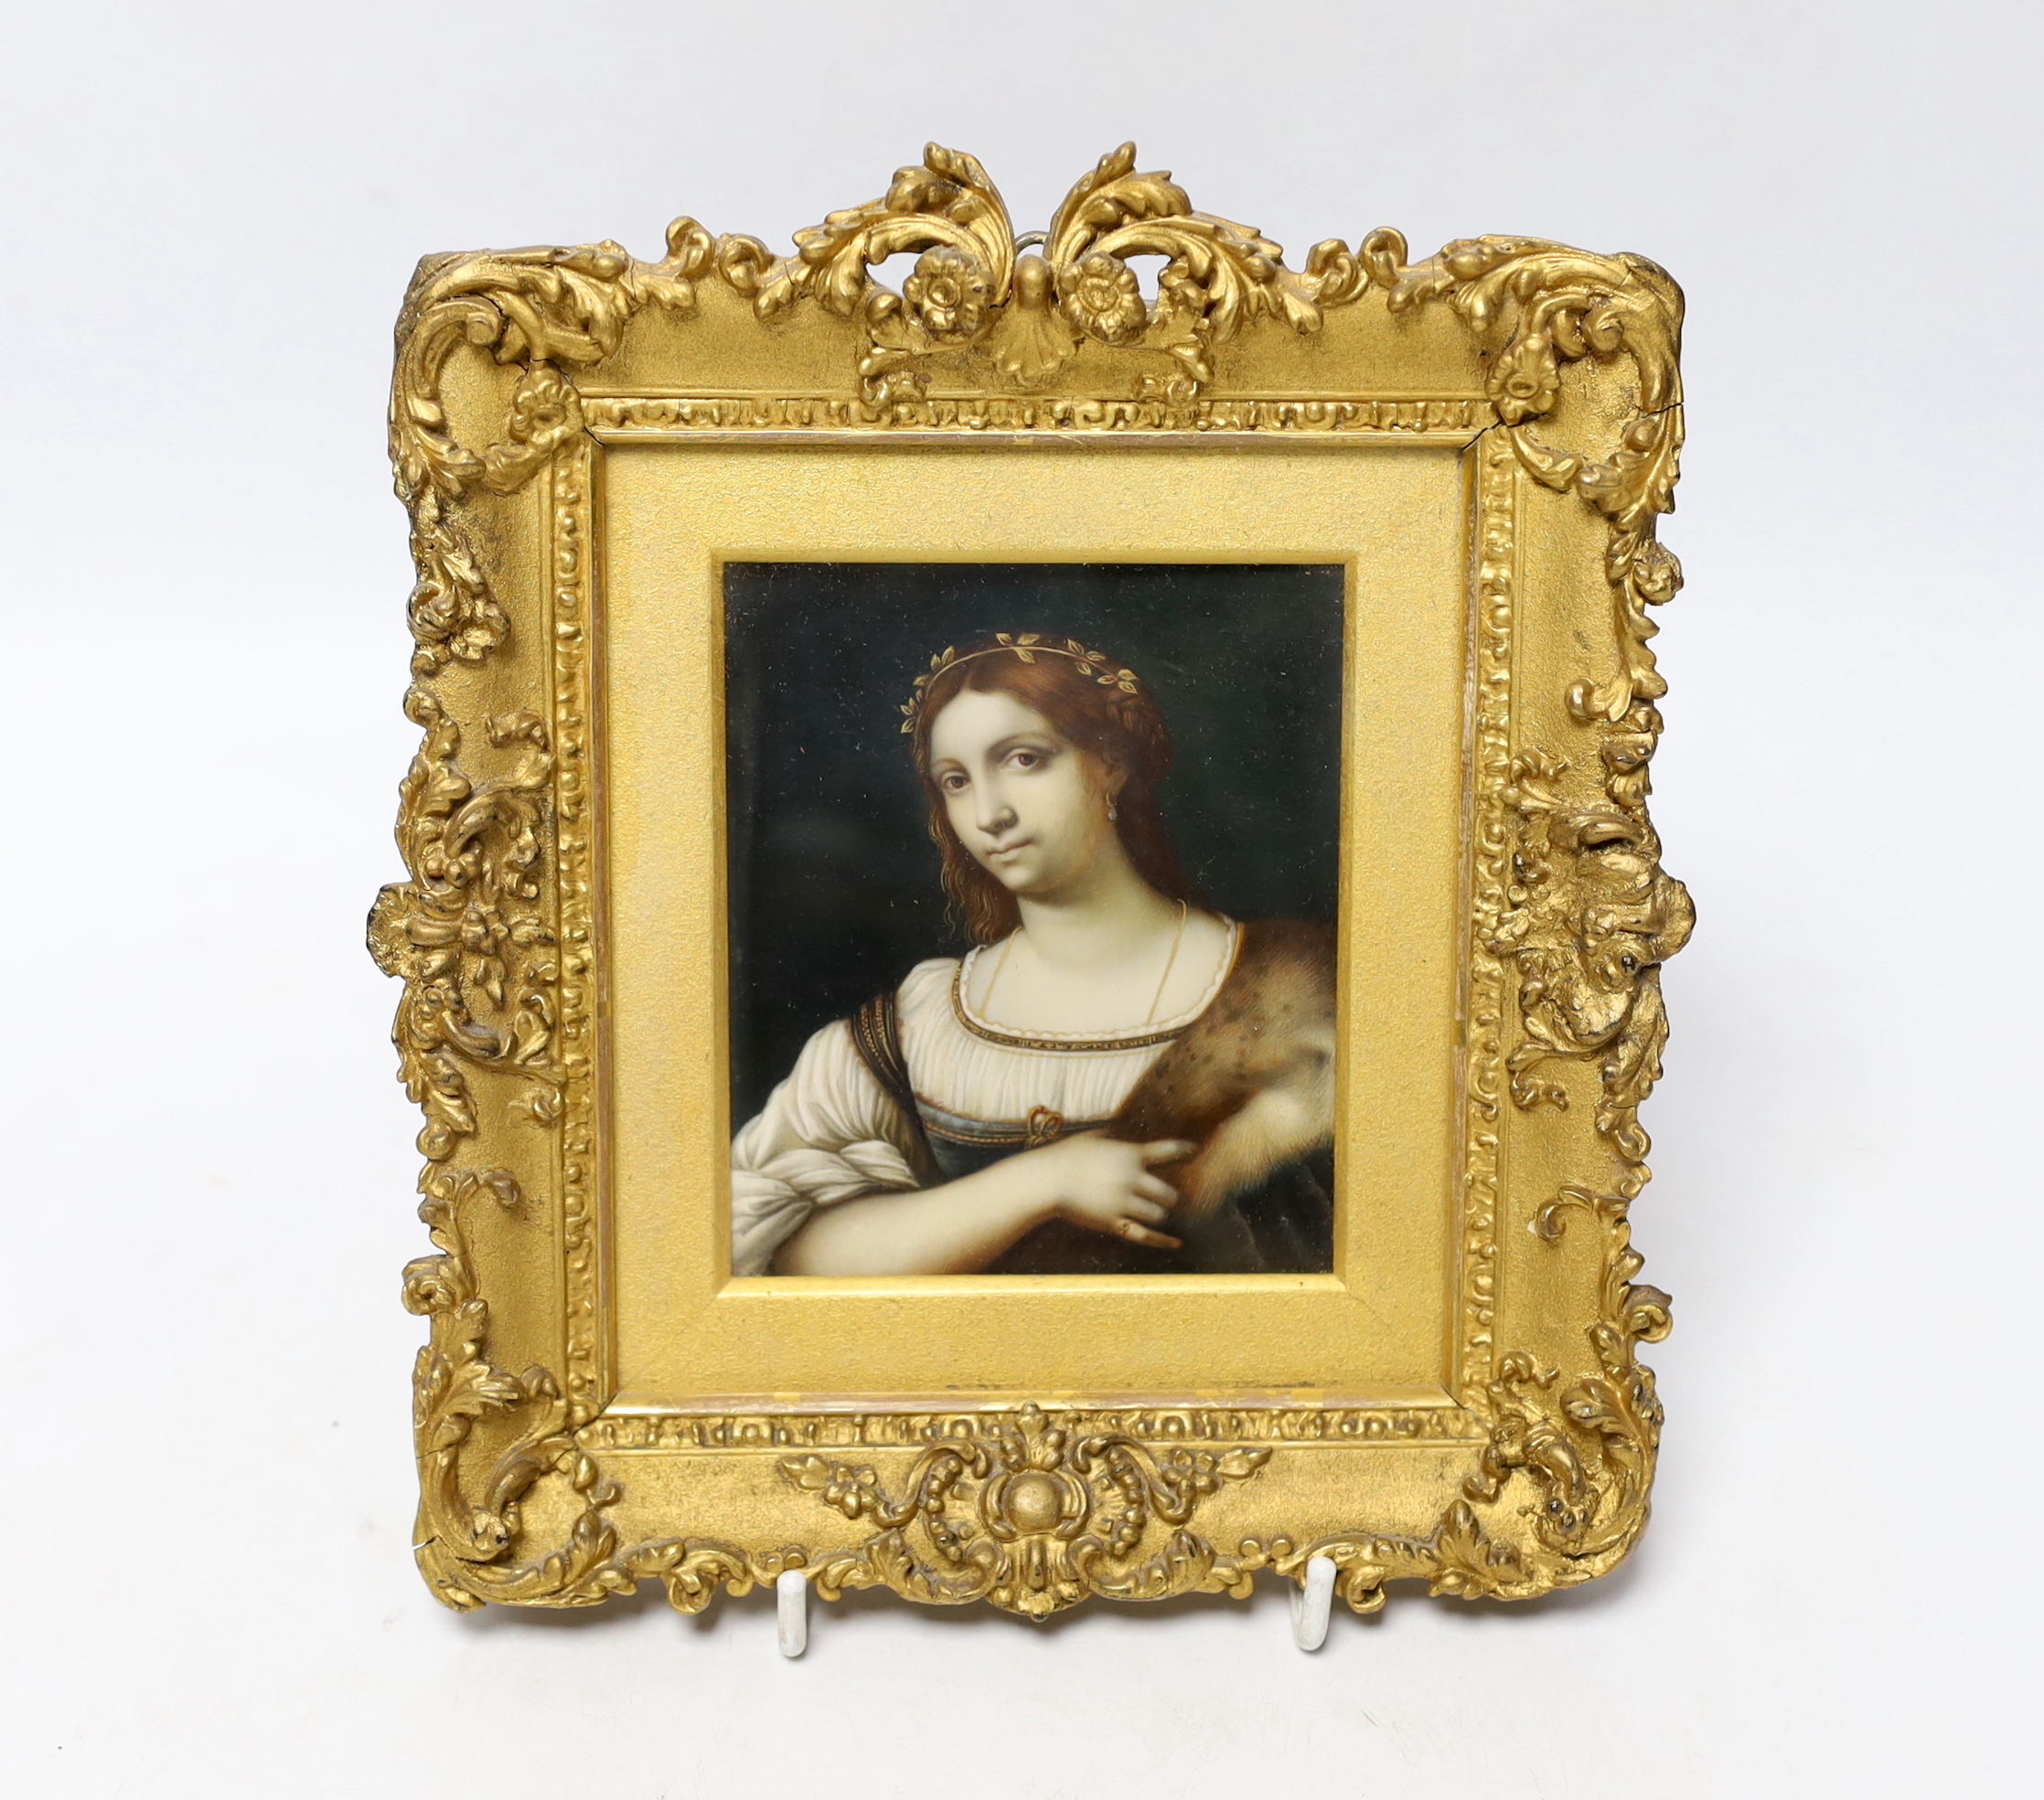 After Sebastiano del Piombo (Italian, 1485-1547), hand-painted miniature on ivory, Portrait of a Woman, housed in an ornate gilt frame, 10 x 8.5cm CITES Submission reference X6X24UNU